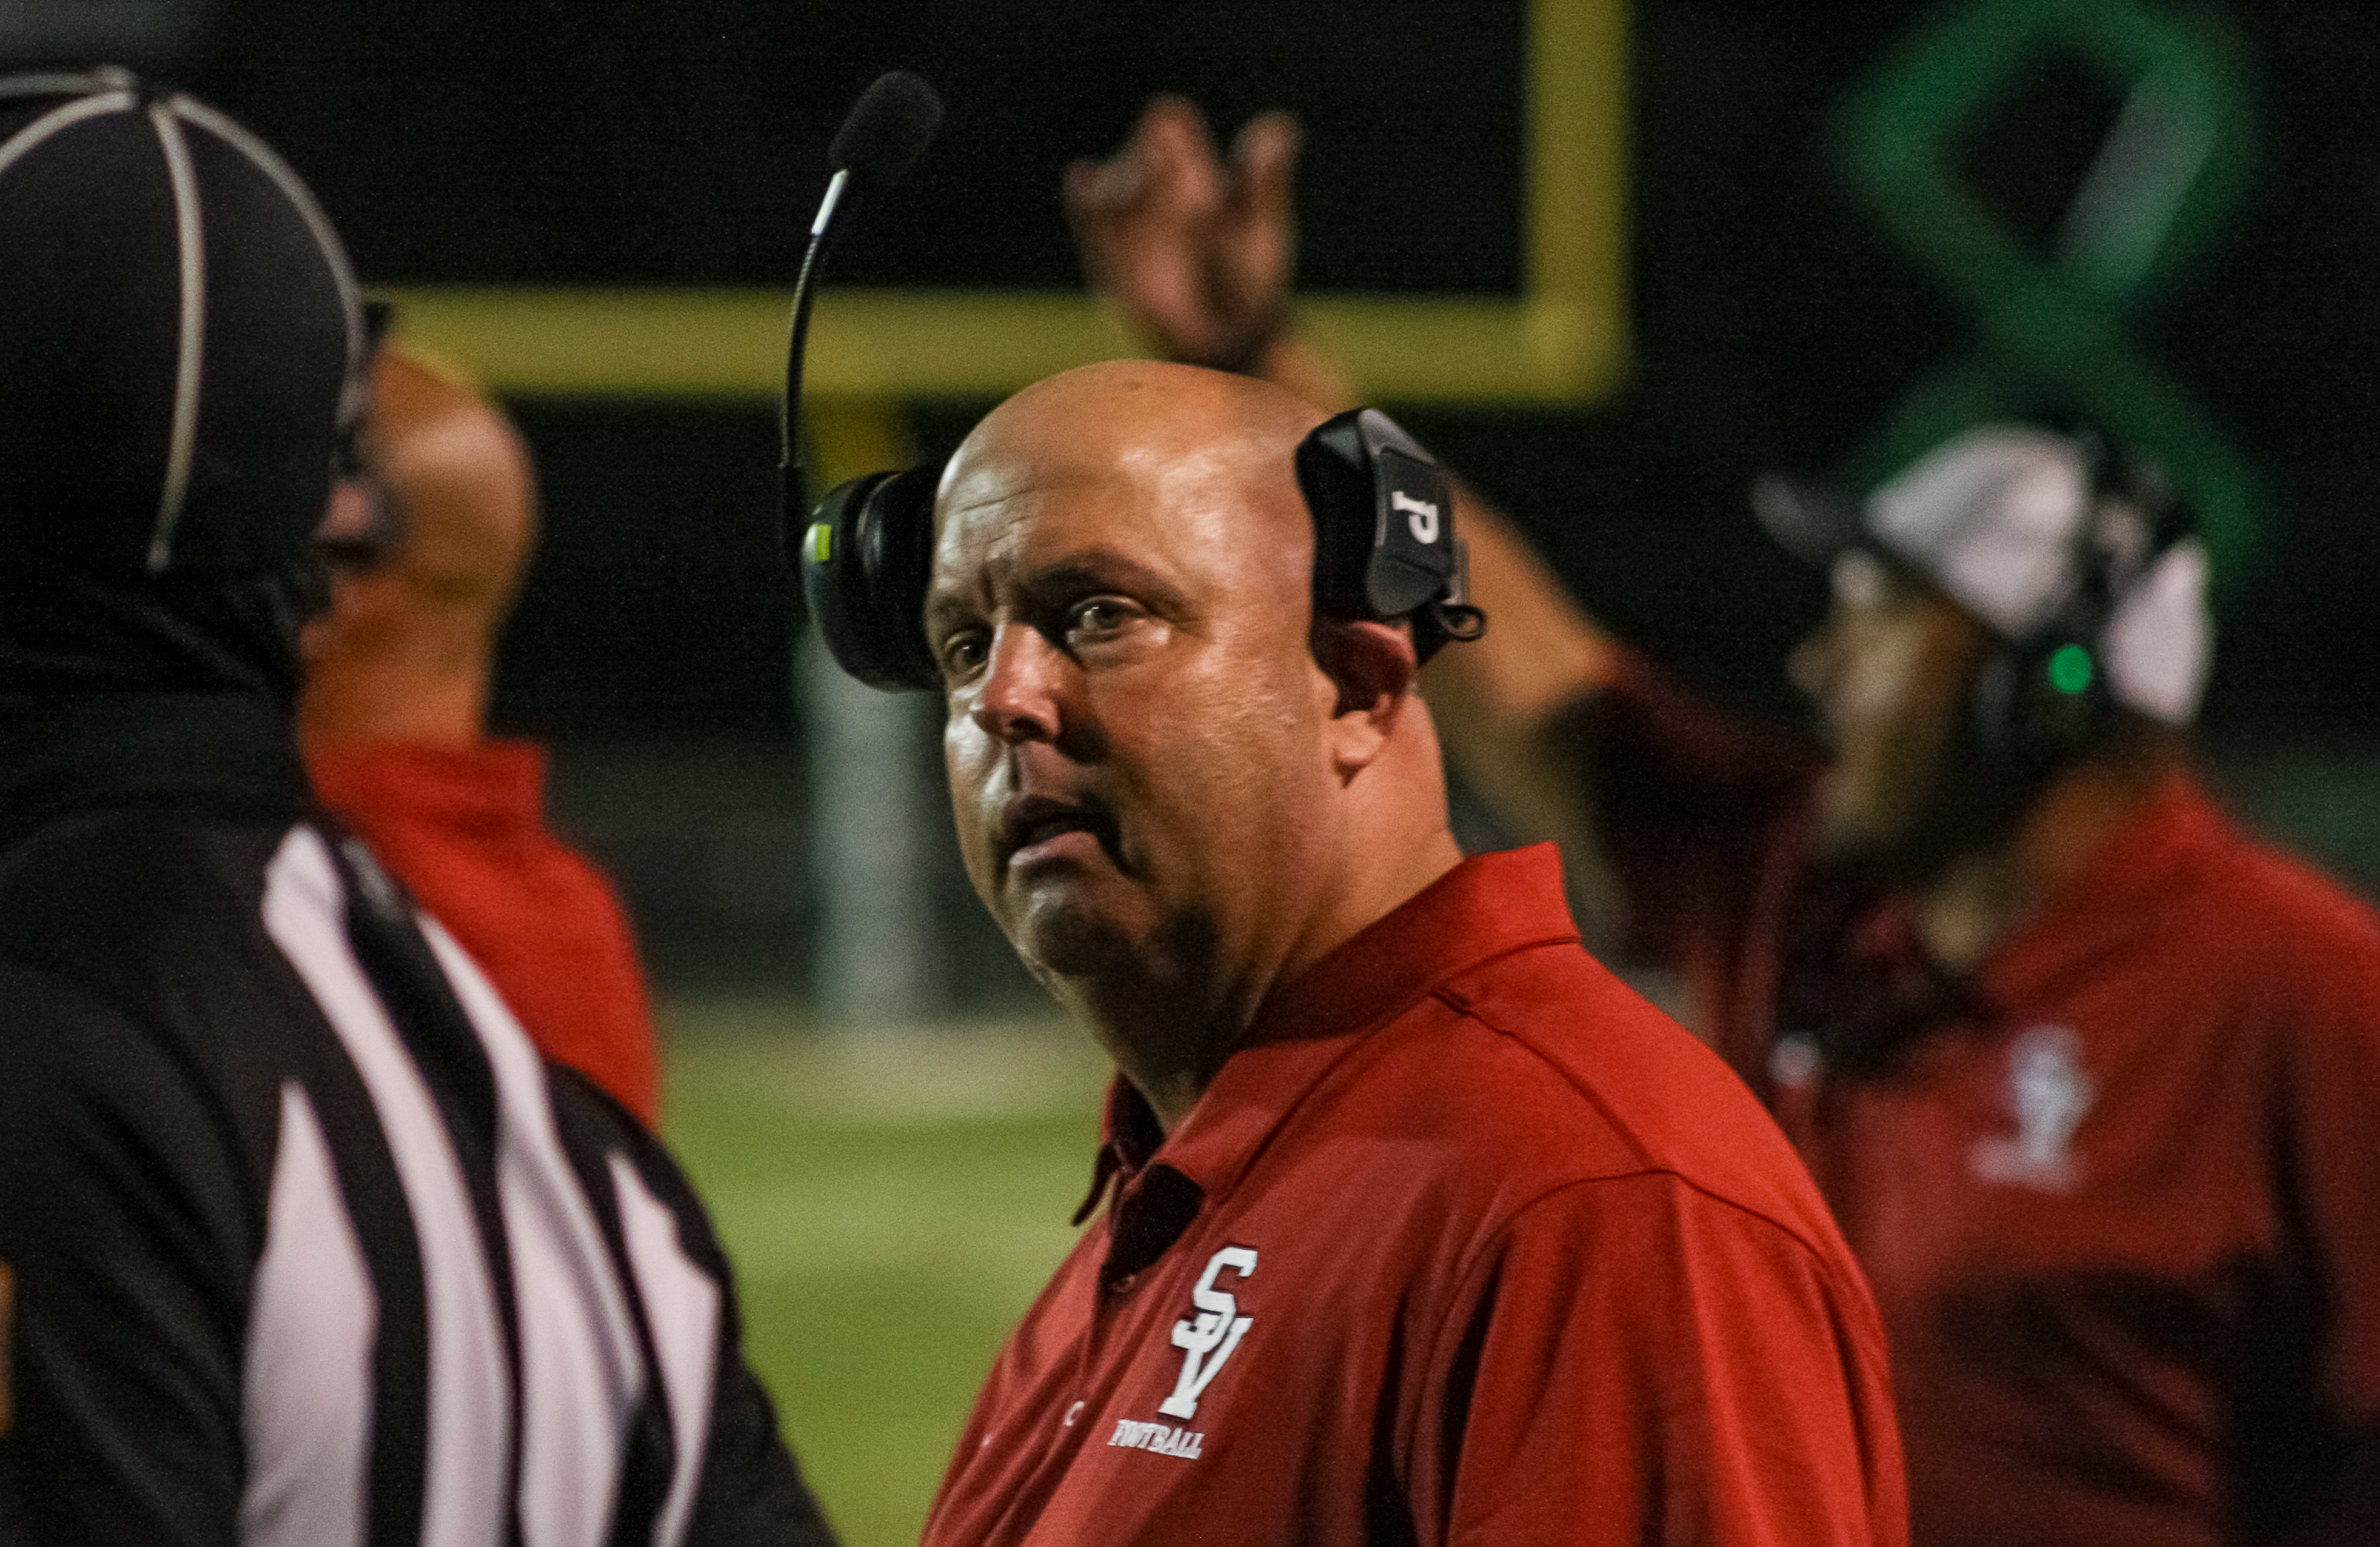 Jamie Mitchell is leaving Shades Valley for Hillcrest-Tuscaloosa